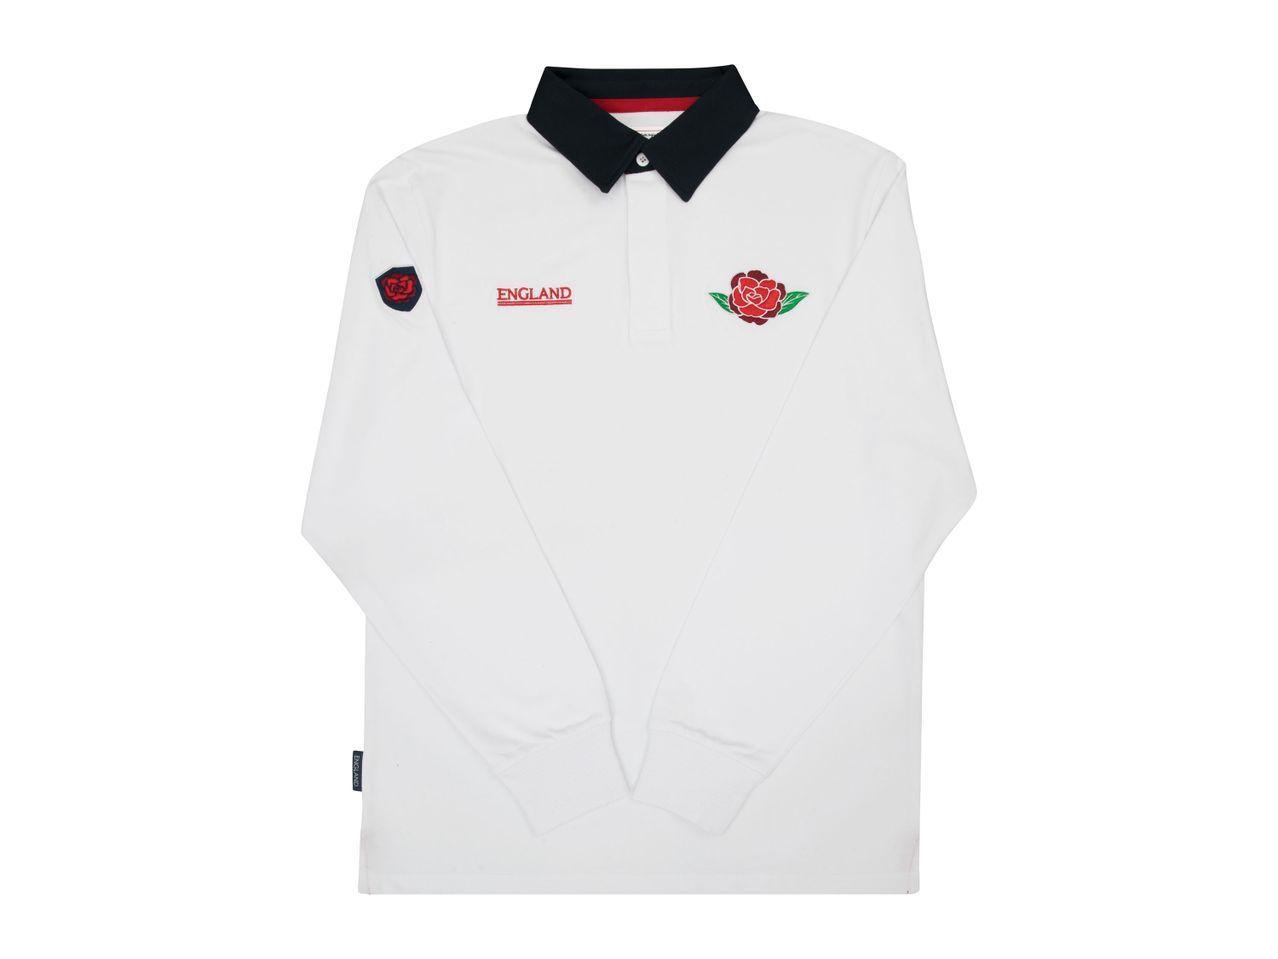 Go to full screen view: Adults’ England Rugby Shirt - Image 2